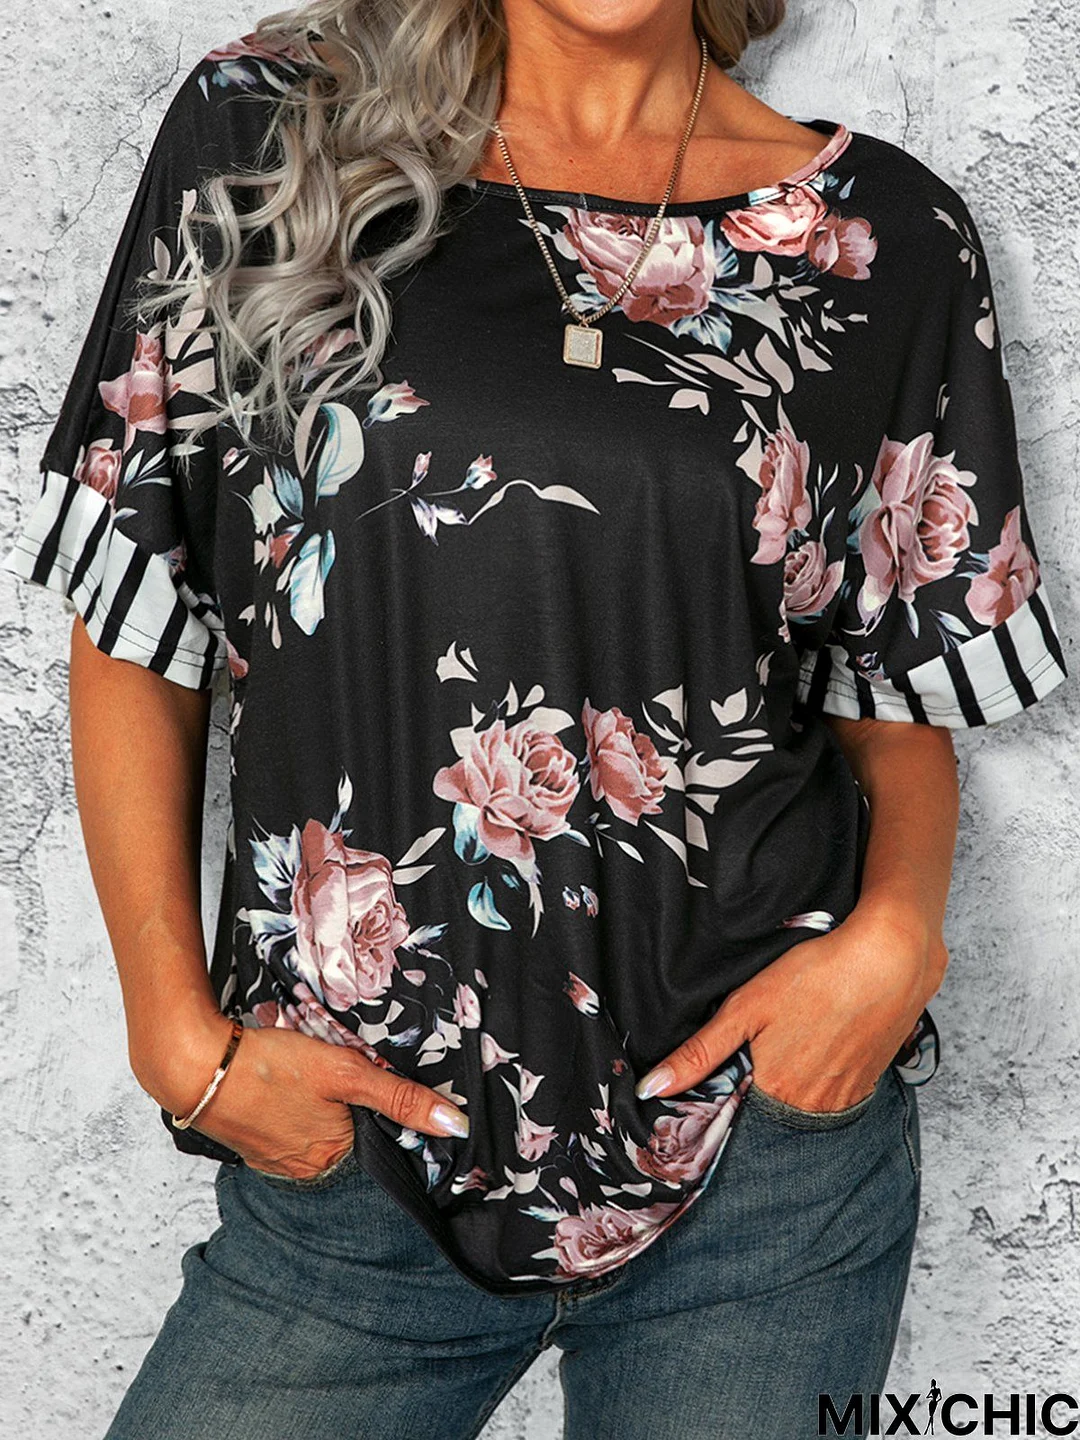 Floral  Short Sleeve  Printed  Cotton-blend  Crew Neck  Casual  Summer  Black Top